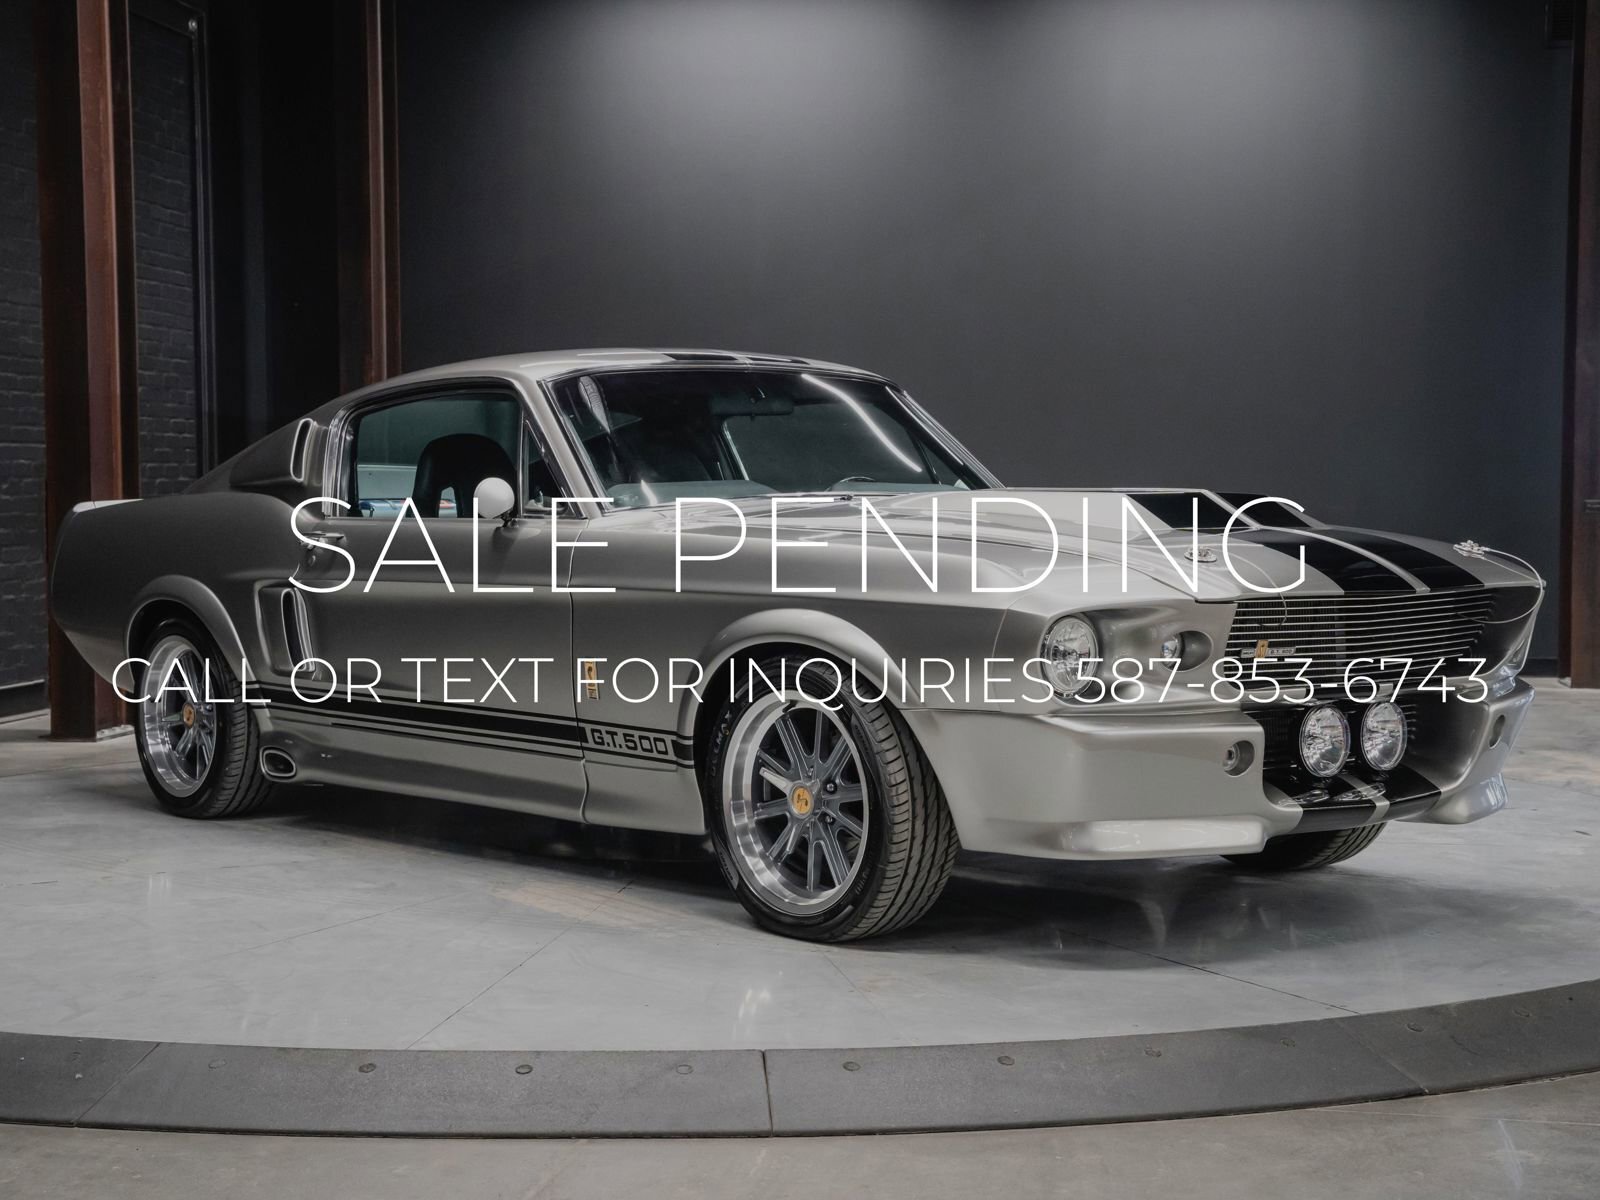 1967 Ford Mustang Shelby GT500 Eleanor | Tremec 5 Speed | 351 Windsor | Test Miles Only S